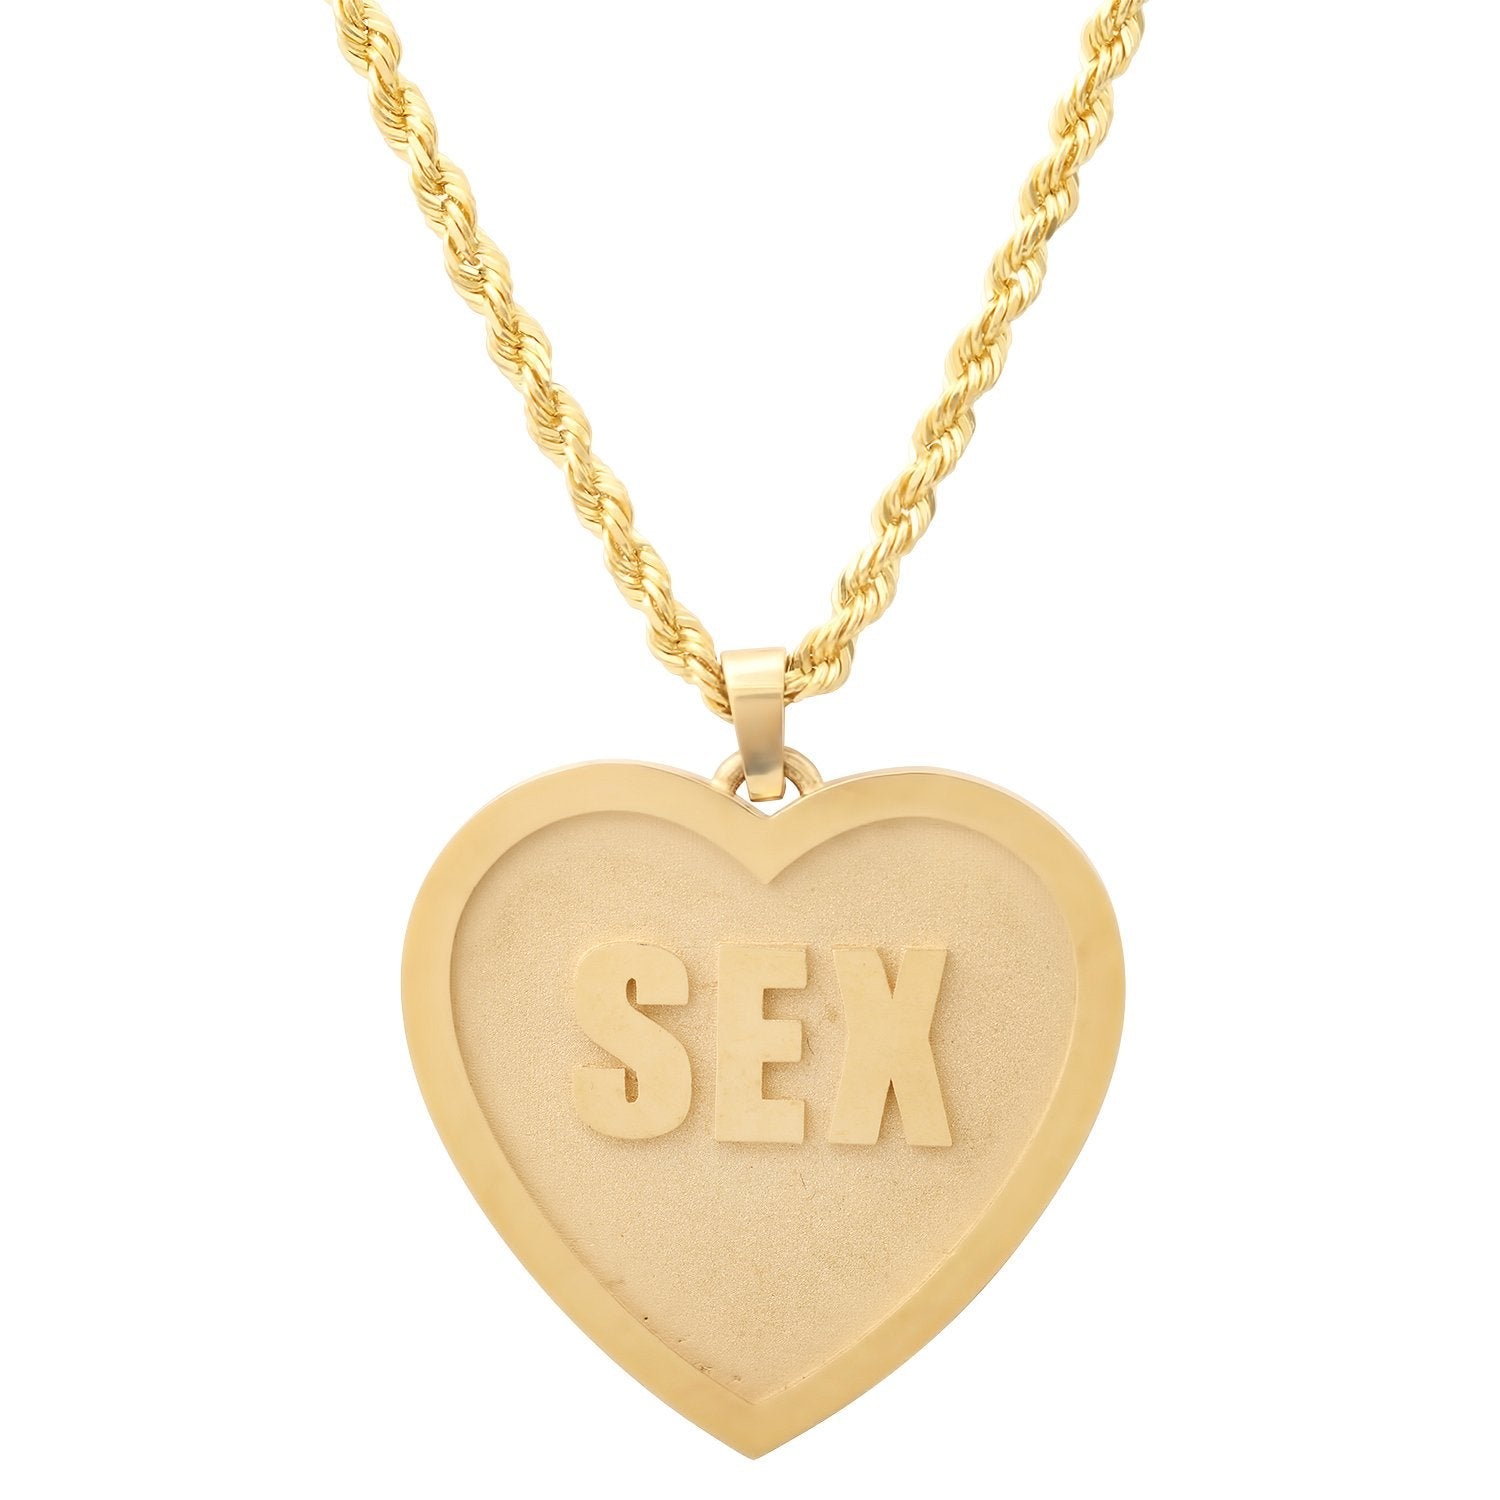 Sex Solid Gold Oversized Heart Necklace